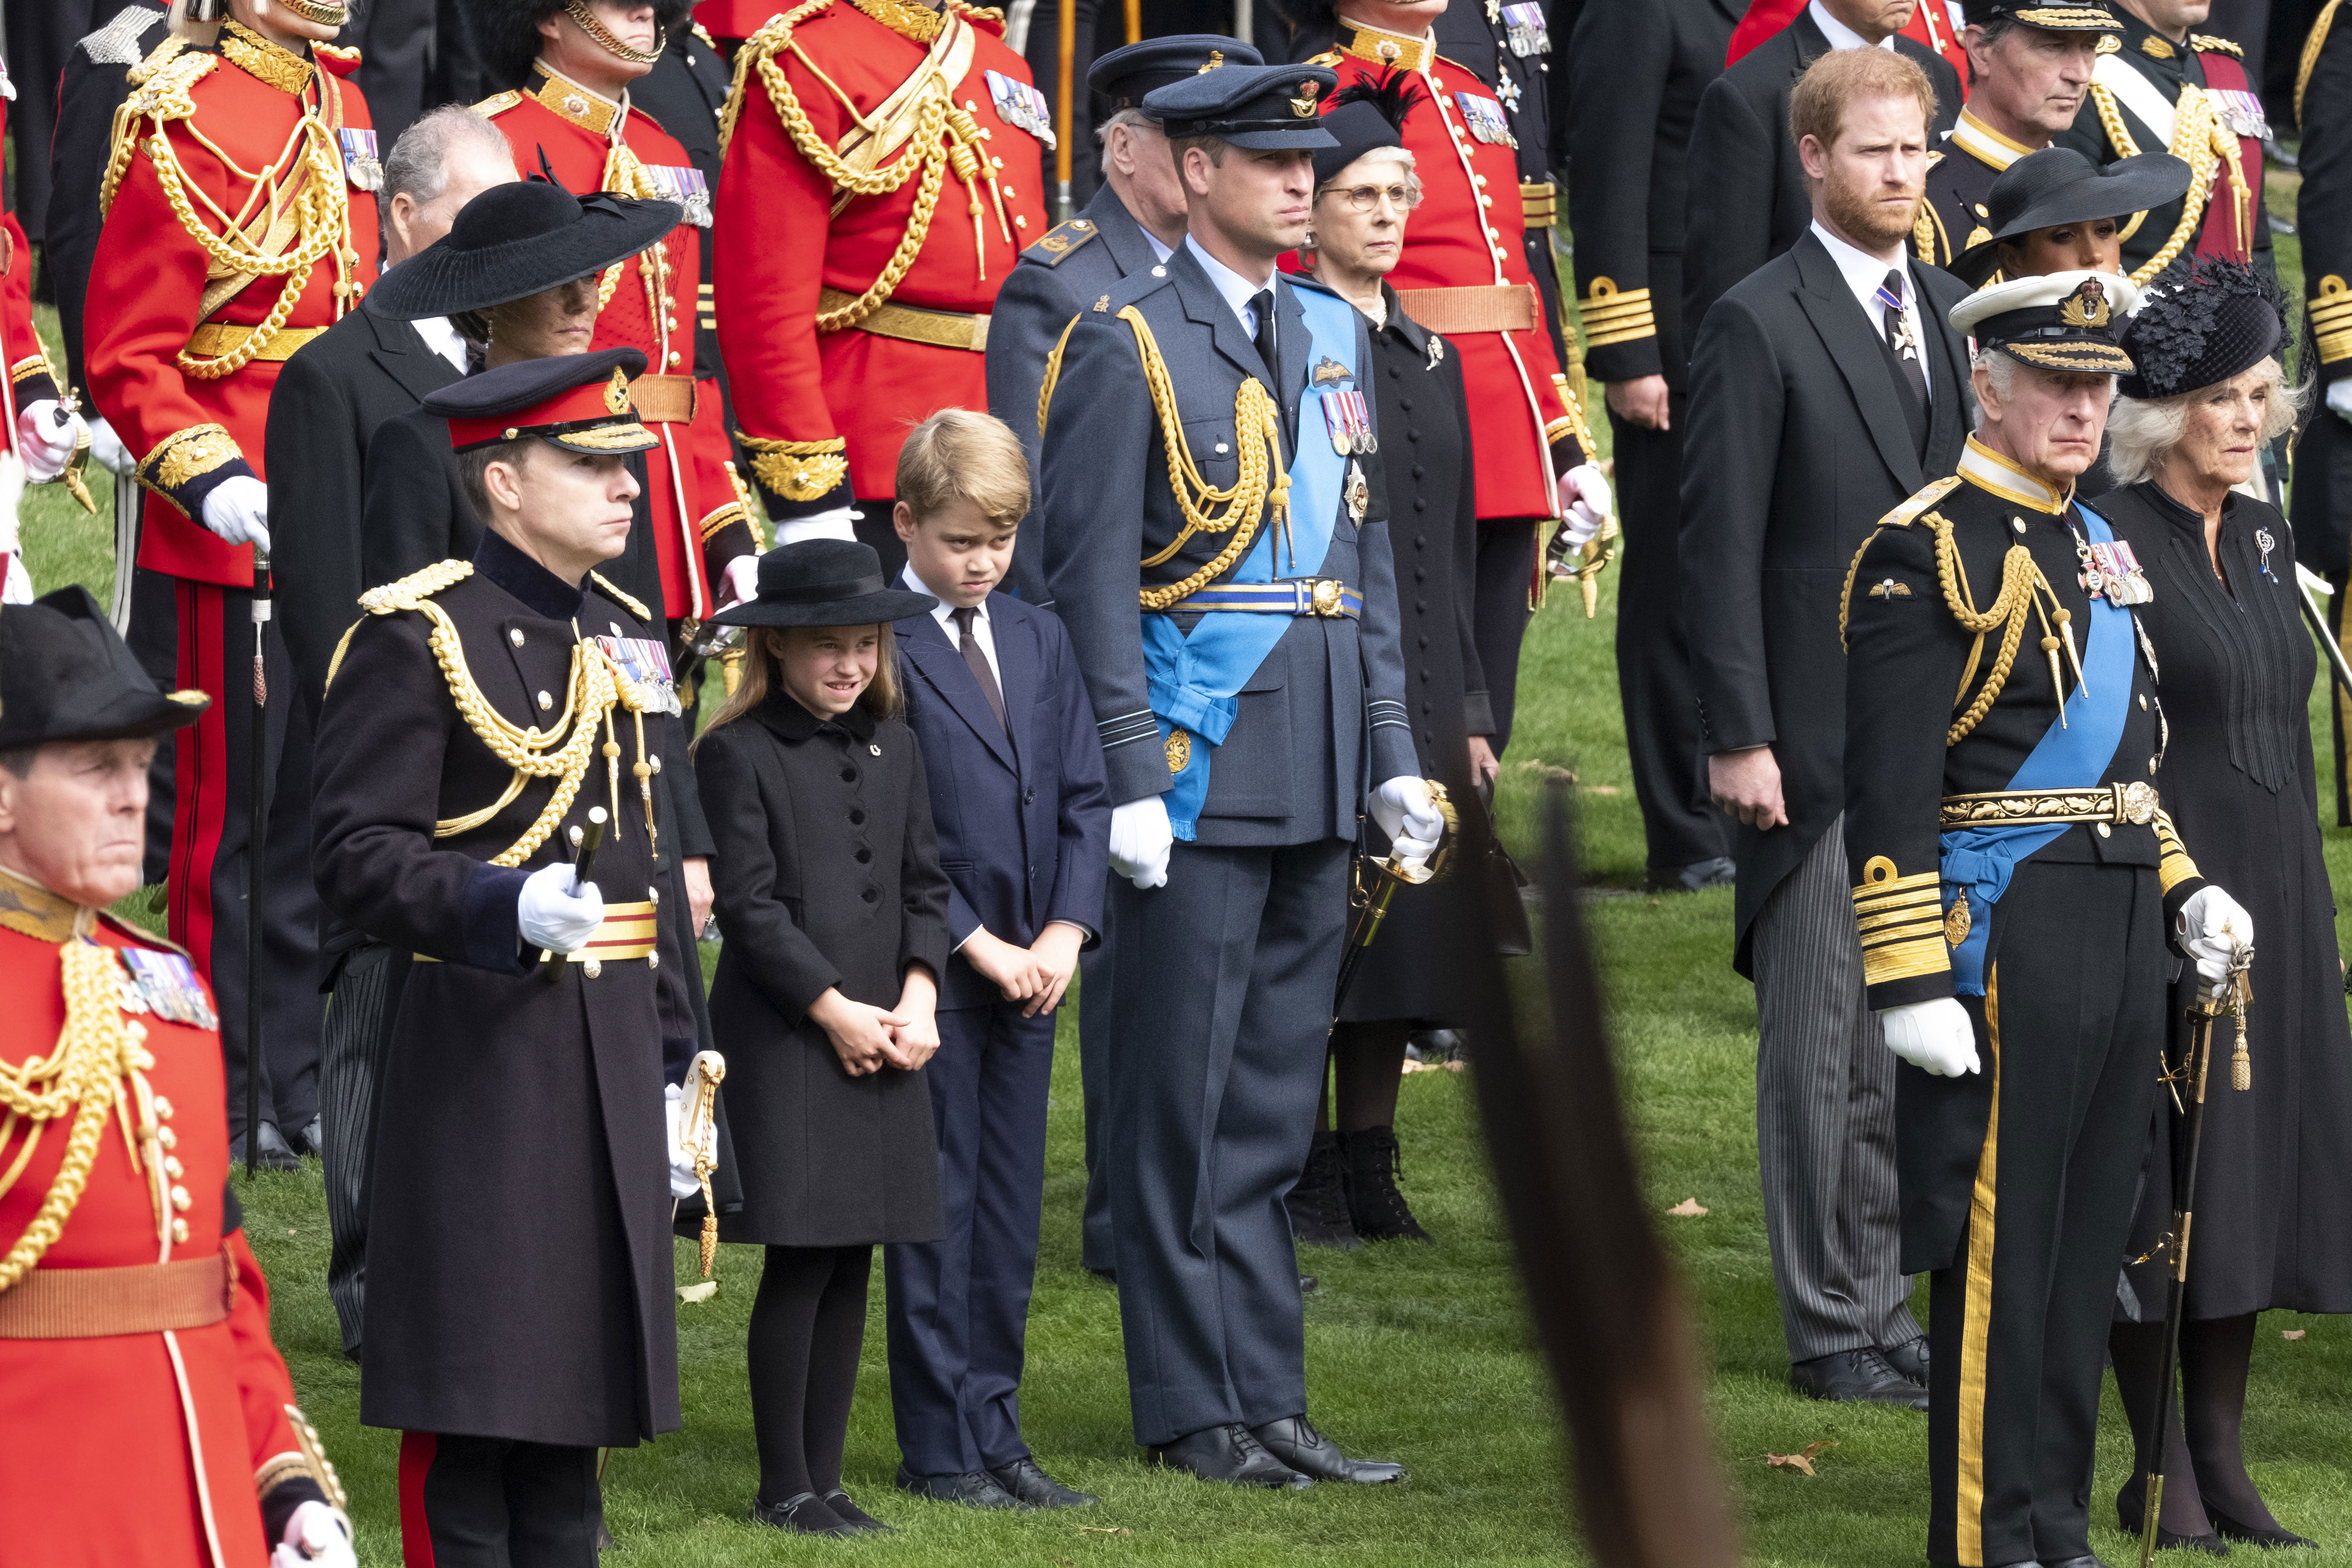 <p>Britain's King Charles III and wife Camilla, Queen Consort; Prince William, Prince of Wales and wife Catherine, Princess of Wales and their kids, Prince George and Princess Charlotte; and Prince Harry, Duke of Sussex and wife Meghan, Duchess of Sussex watched as the coffin of the late Queen Elizabeth II arrived at Wellington Arch from Westminster Abbey in London on Sept. 19, 2022, before being driven to Windsor, England, <a href="https://www.wonderwall.com/celebrity/royals/best-photos-from-queen-elizabeth-ii-funeral-king-charles-princes-william-prince-harry-george-charlotte-kate-meghan652347.gallery">for her burial</a>.</p>